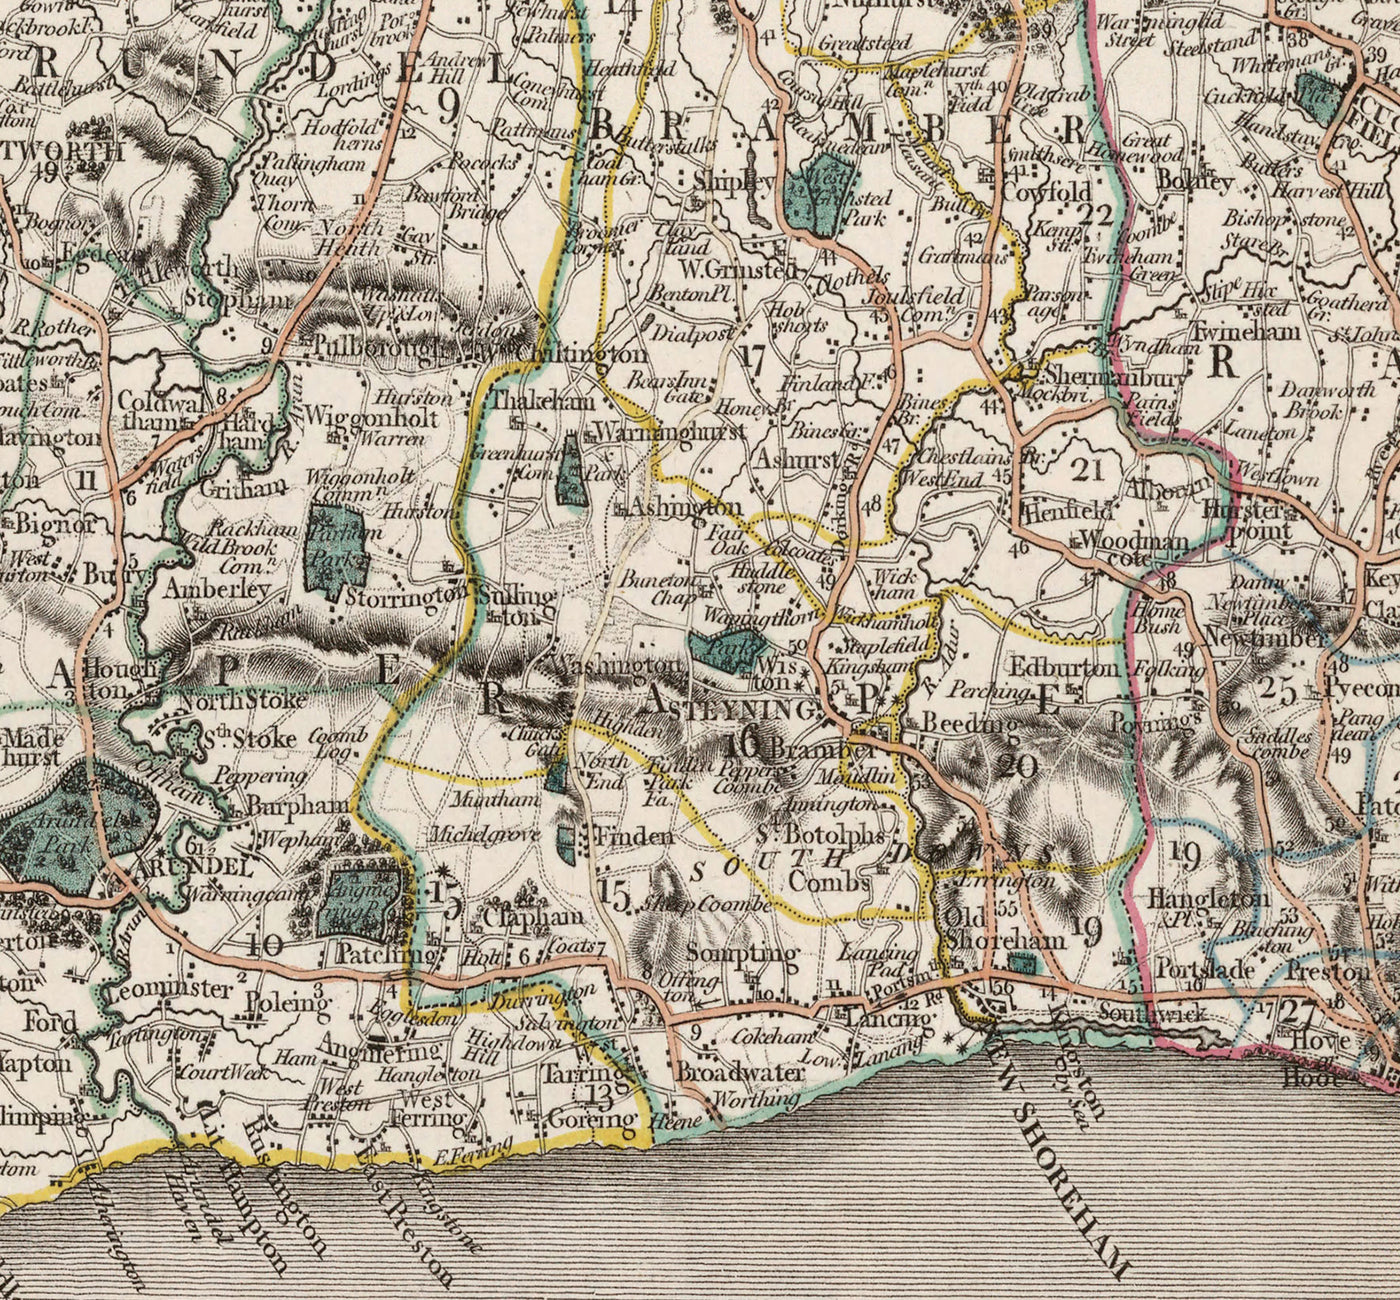 Old Map of Sussex in 1801 by John Cary - Brighton, Hastings, Eastbourne, Preston, Dumford